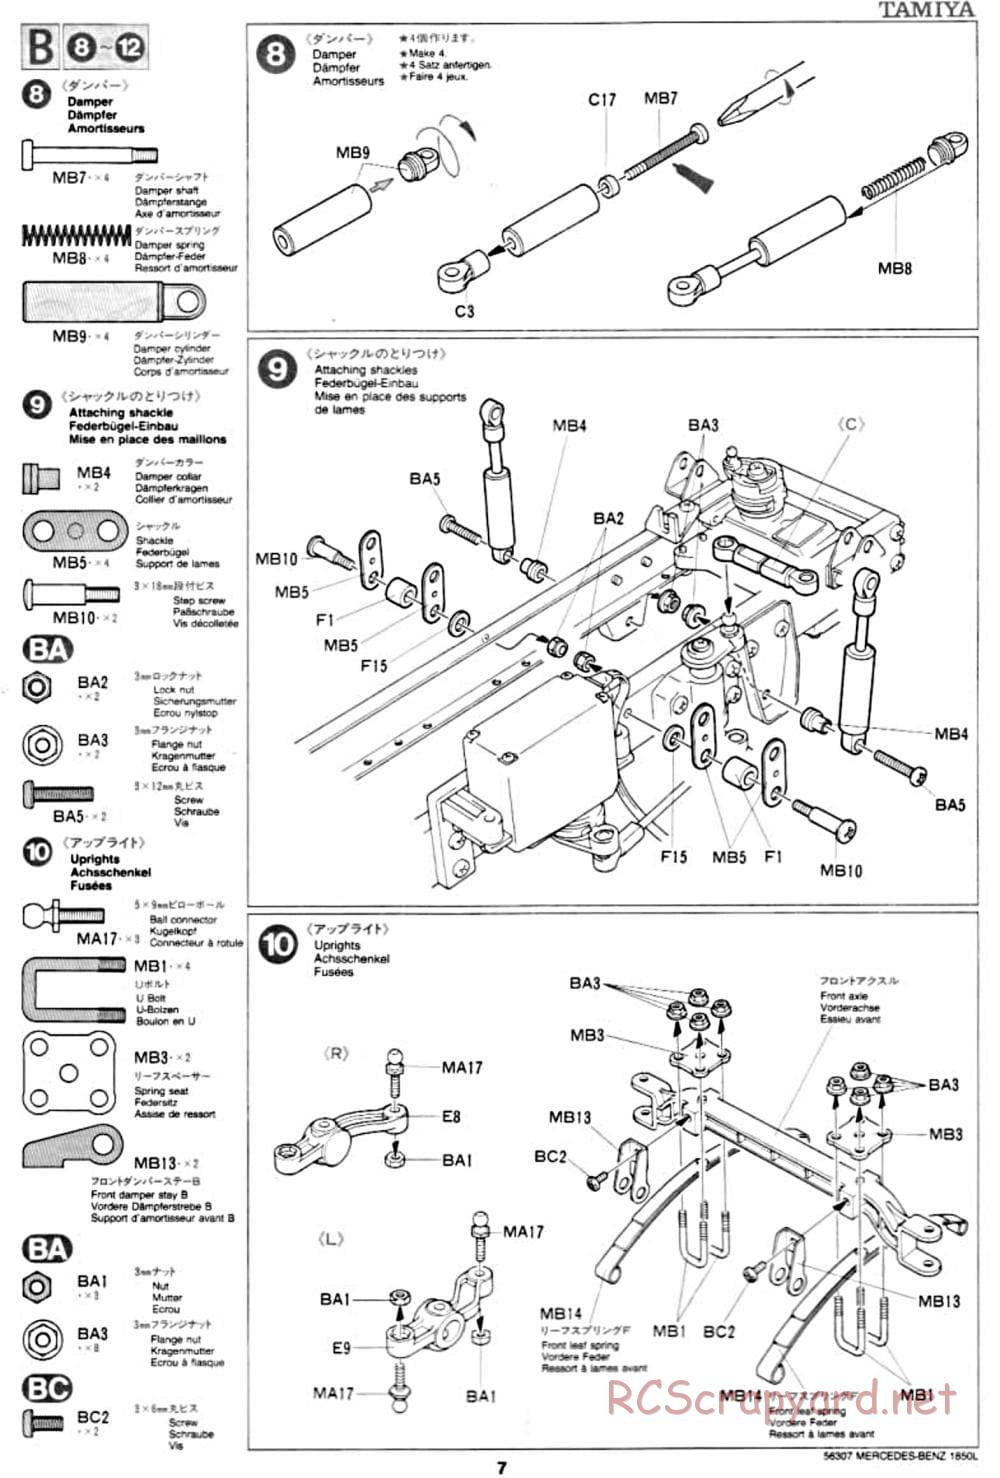 Tamiya - Mercedes-Benz 1850L Delivery Truck - Manual - Page 7